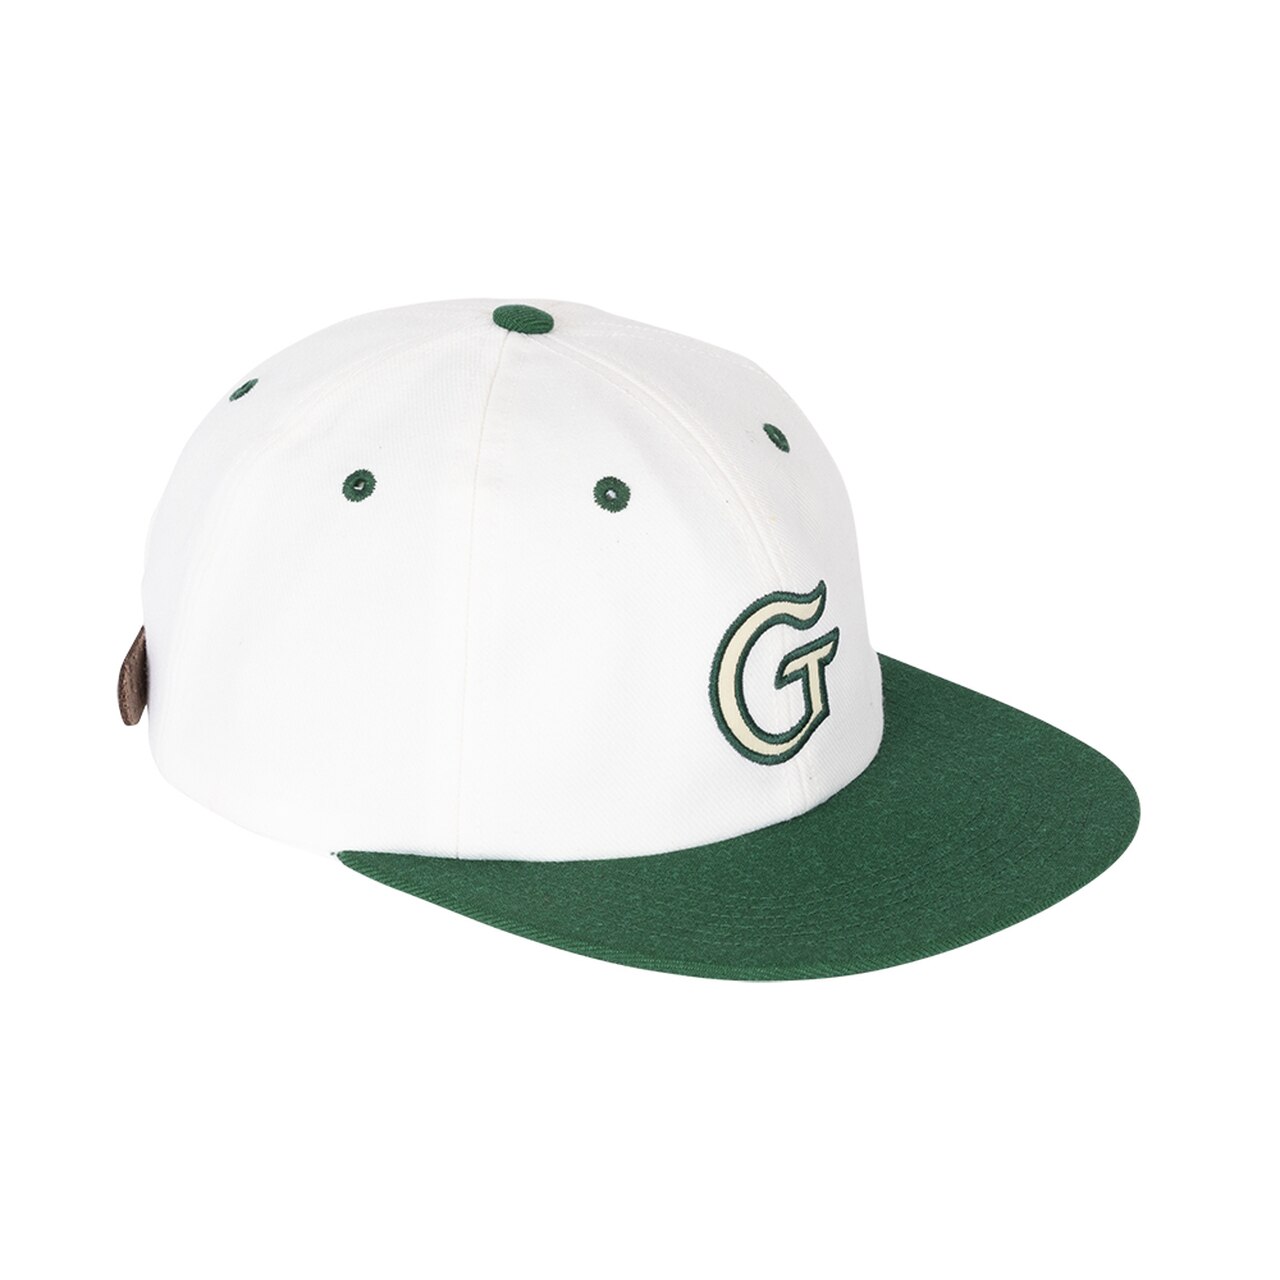 Gaylord Two-Tone 6 Panel Hat GREEN - Winter 2018 - Golf Wang